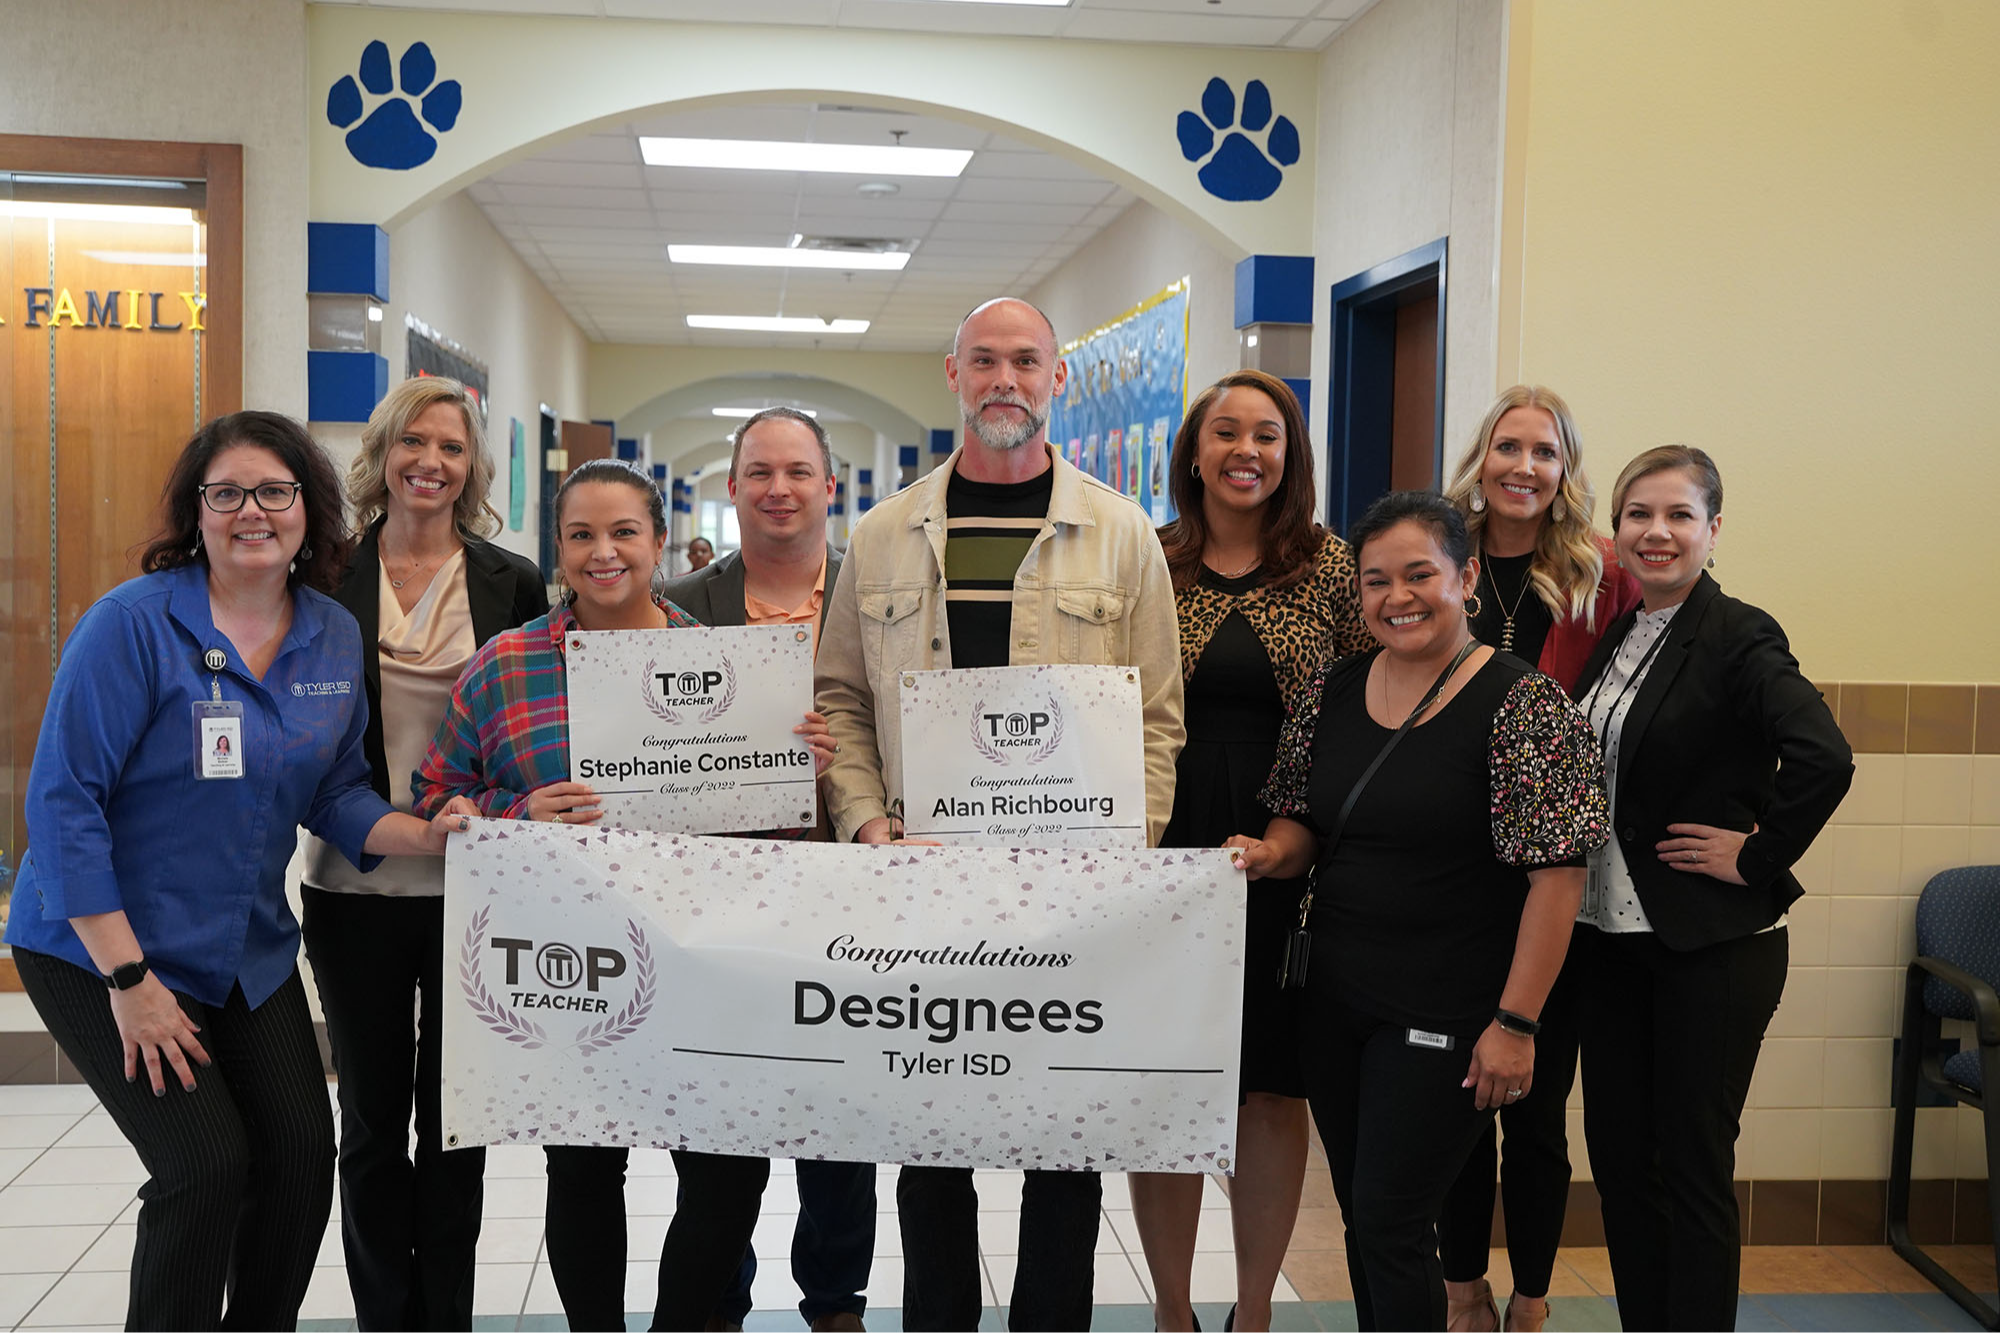 group of men and women standing behind a banner that says, "TOP Teacher - Congratulations Designees Tyler ISD"